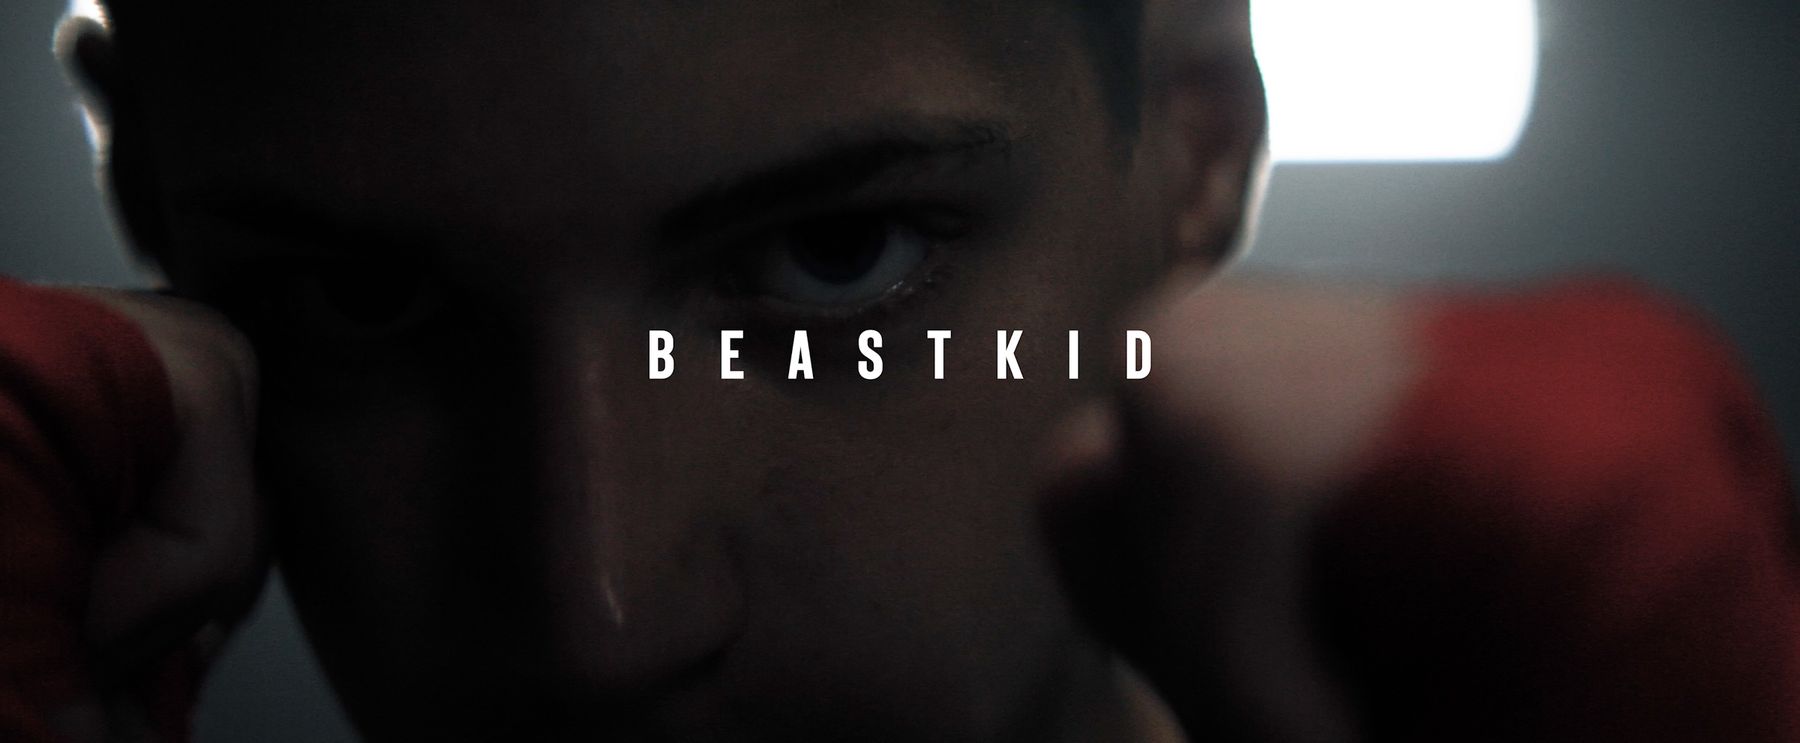 Meet Brody a.k.a “Beast Kid”: The Next Generation of Boxing